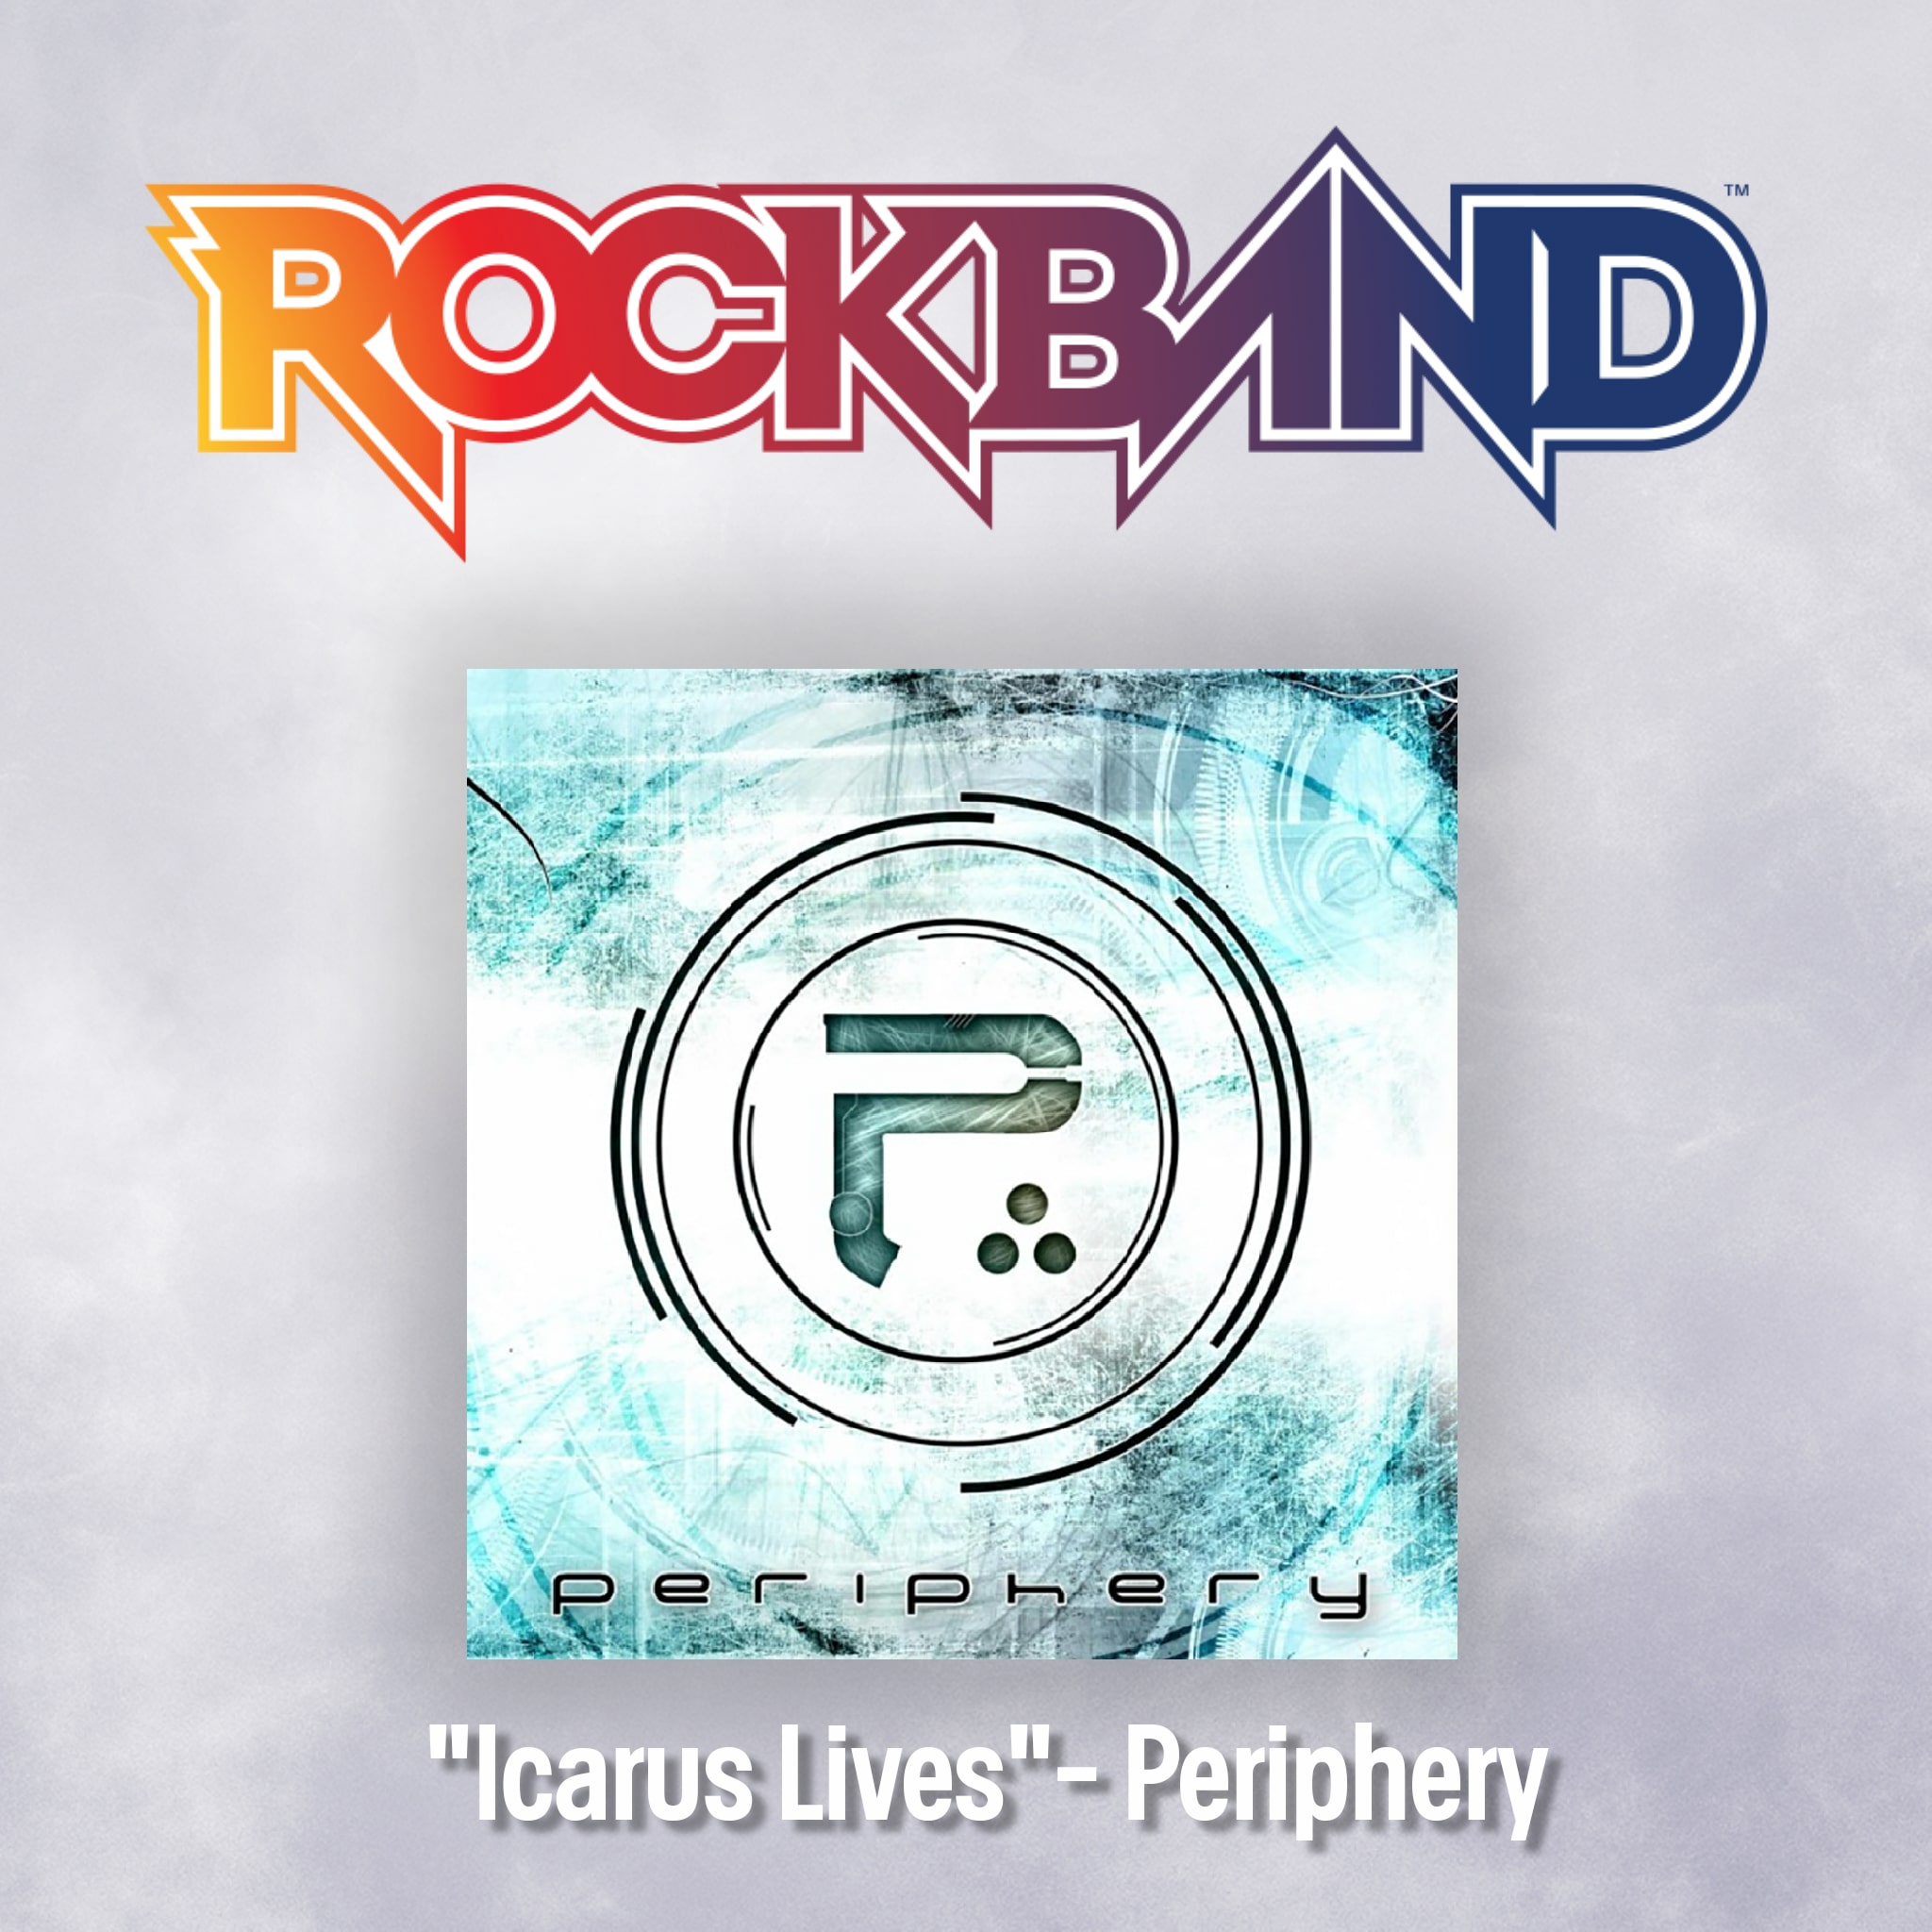 'Icarus Lives'- Periphery